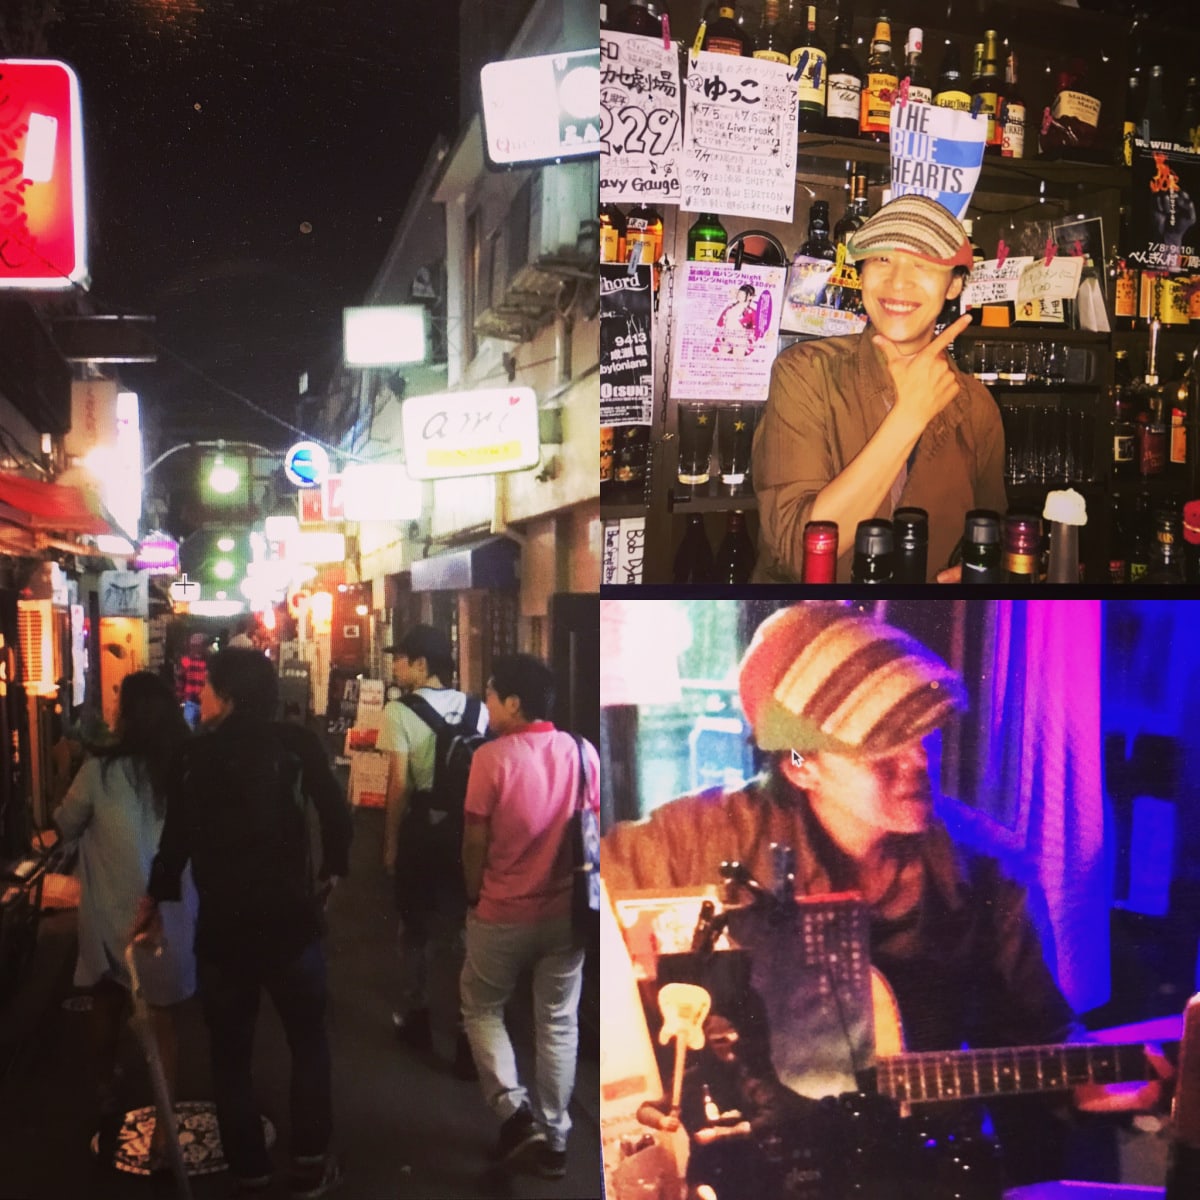 A #Wanderlust Trip To Tokyo’s Golden Gai Nightlife – With Live Musical Performance!